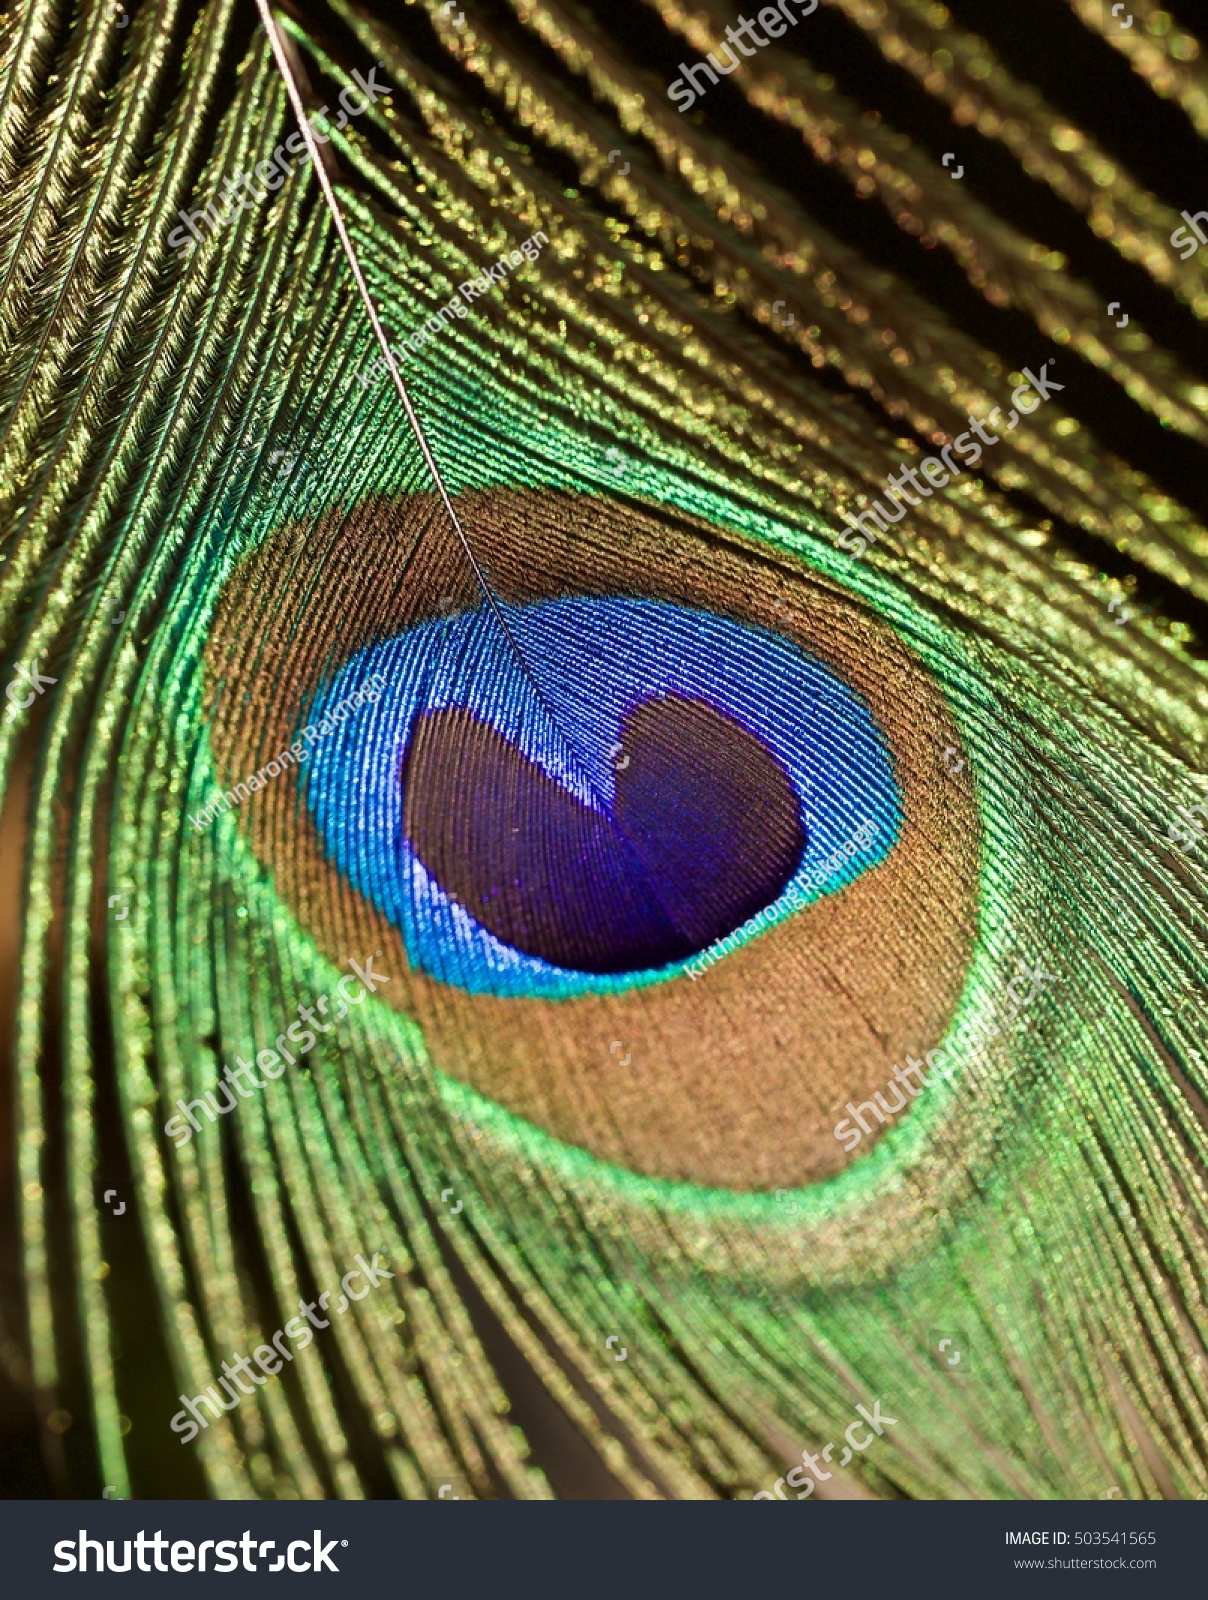 Close Up Peacock Feathers On Black Stock Photo 503541565 - Shutterstock